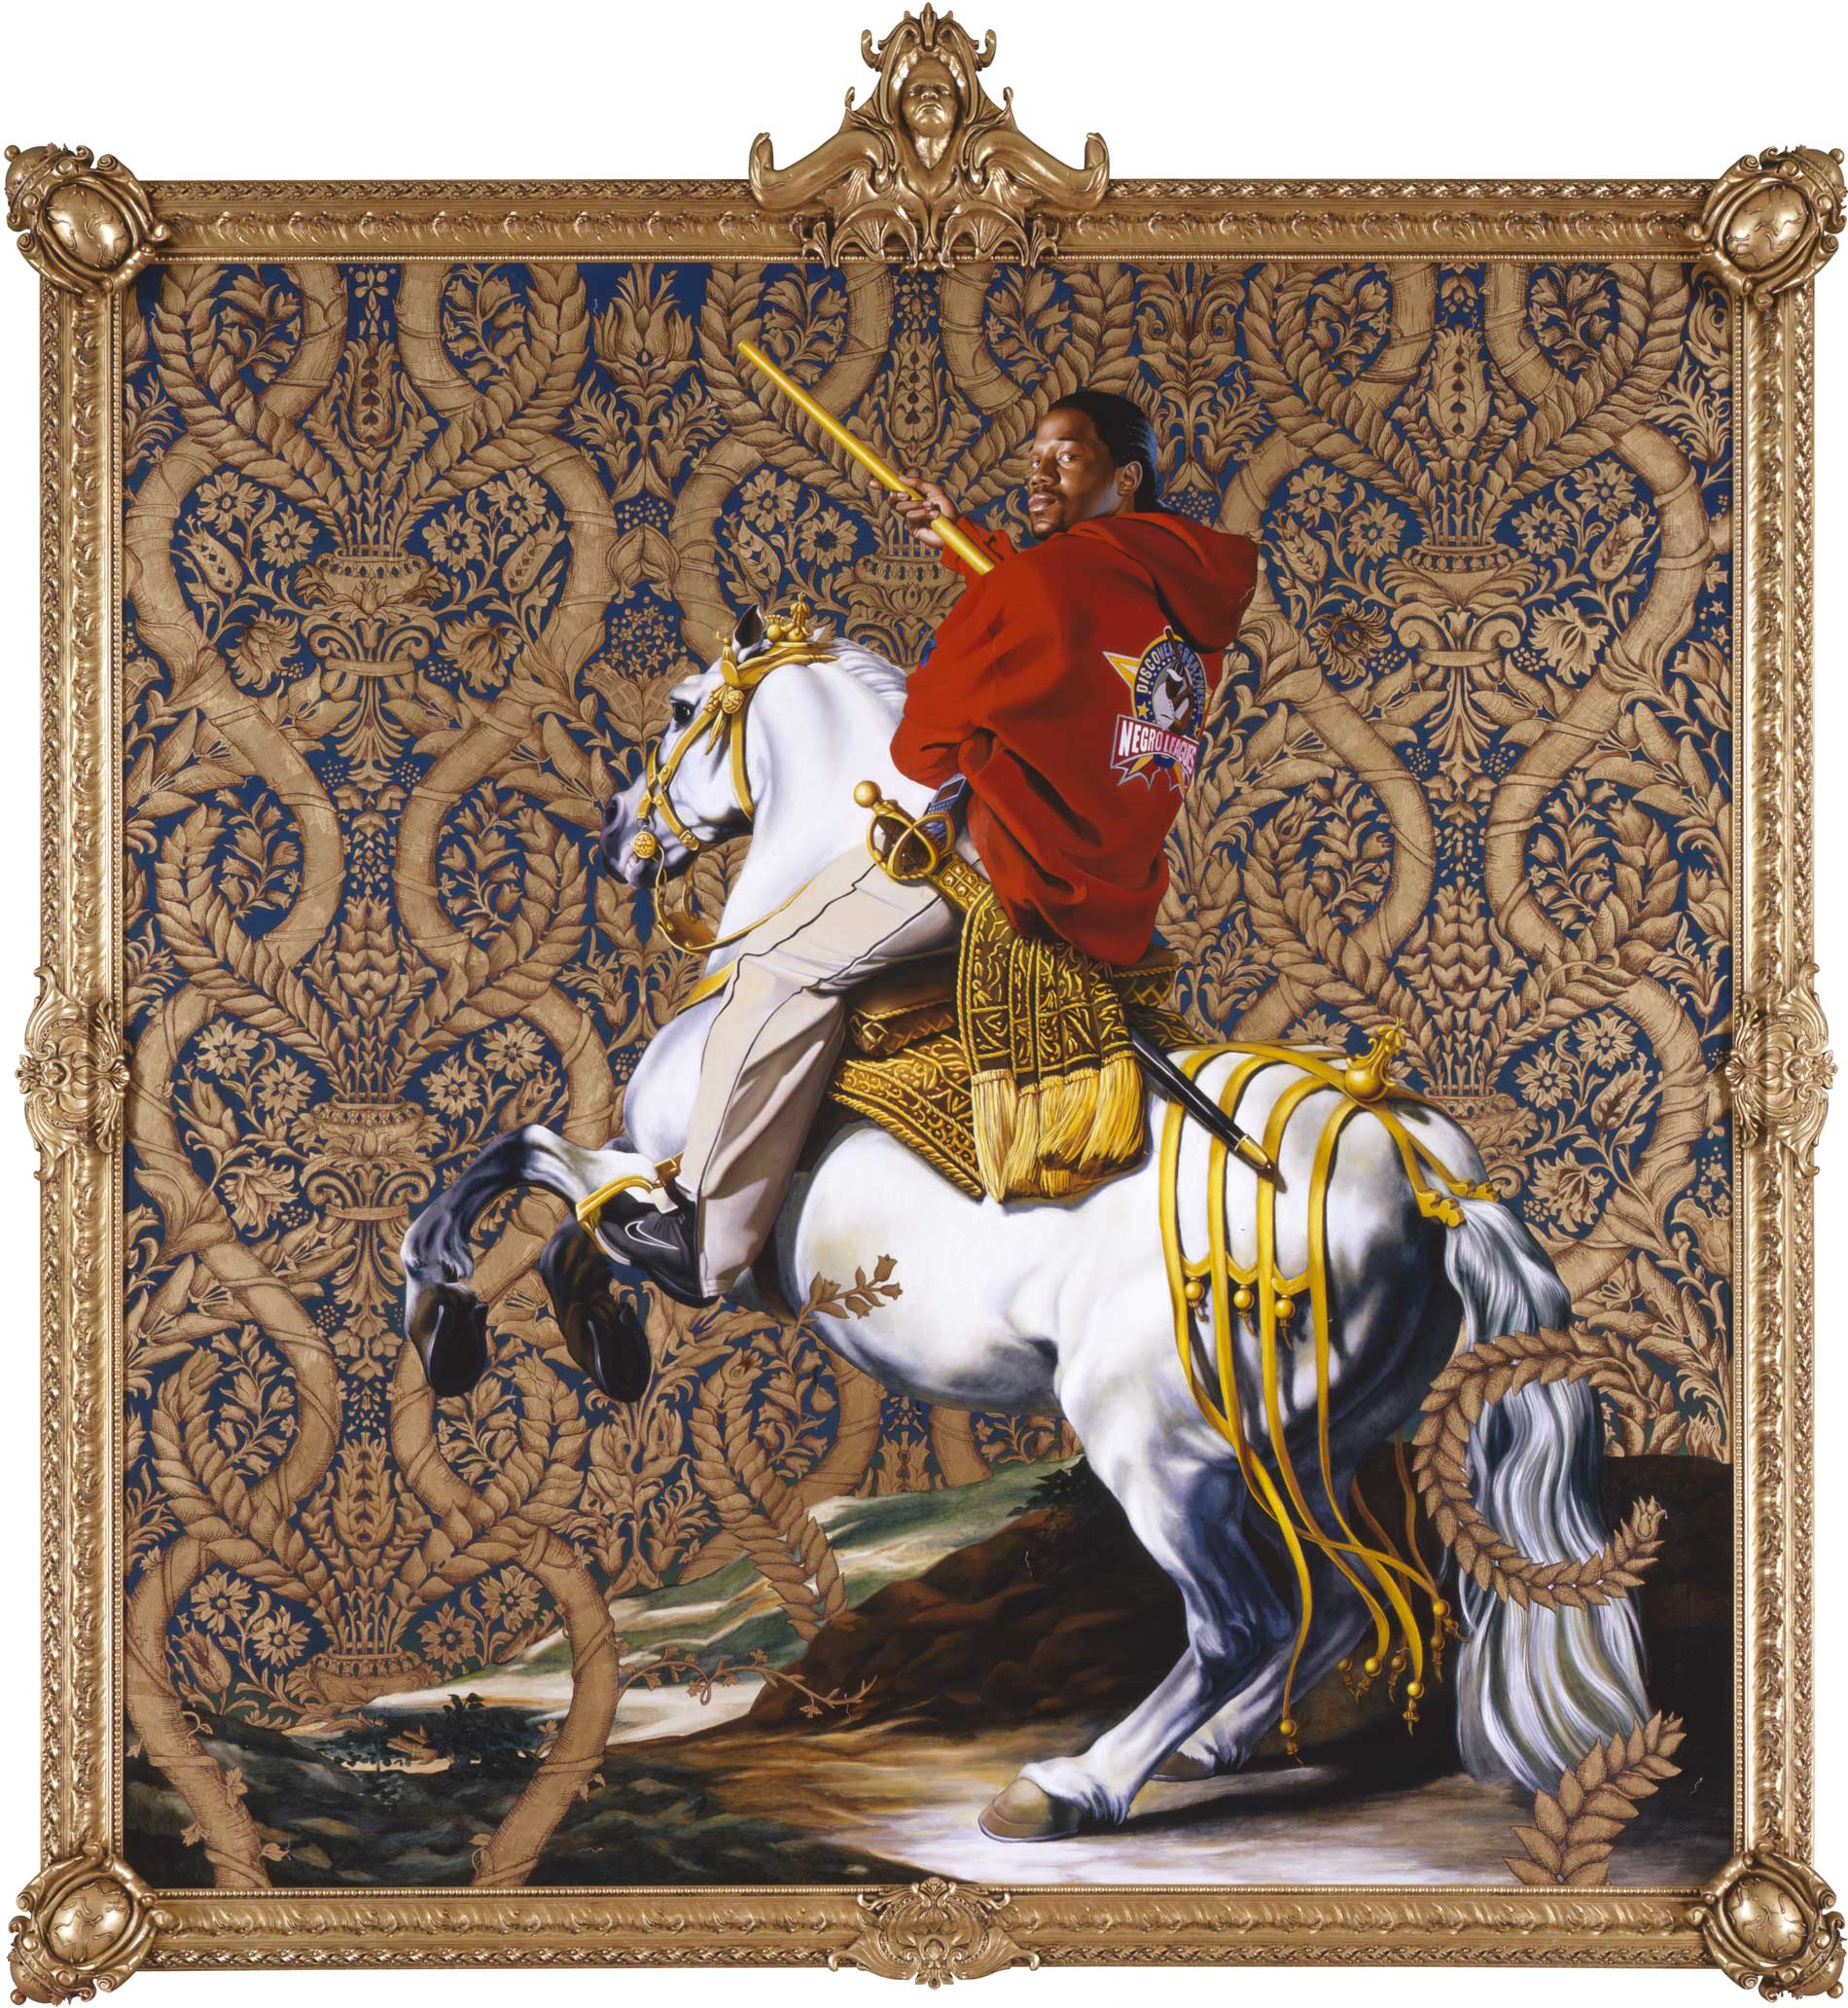 Kehinde Wiley | Rumors of War | Equestrian Portrait of the Count-Duke Olivares, 2005 Oil and Enamel on Canvas.  | 2